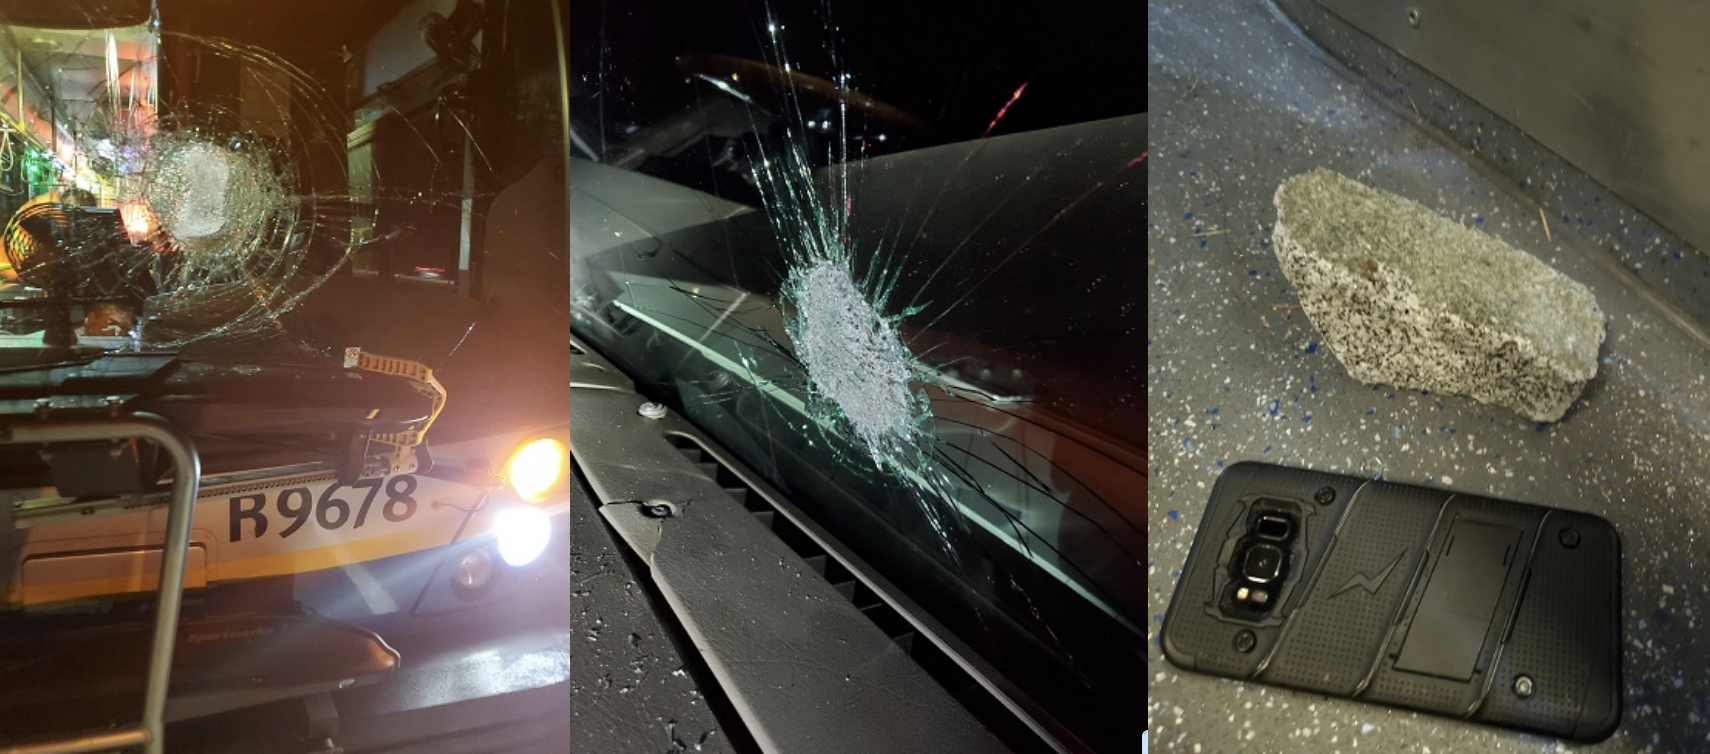 Surrey: Multiple vehicles damaged by rocks thrown from pedestrian overpass